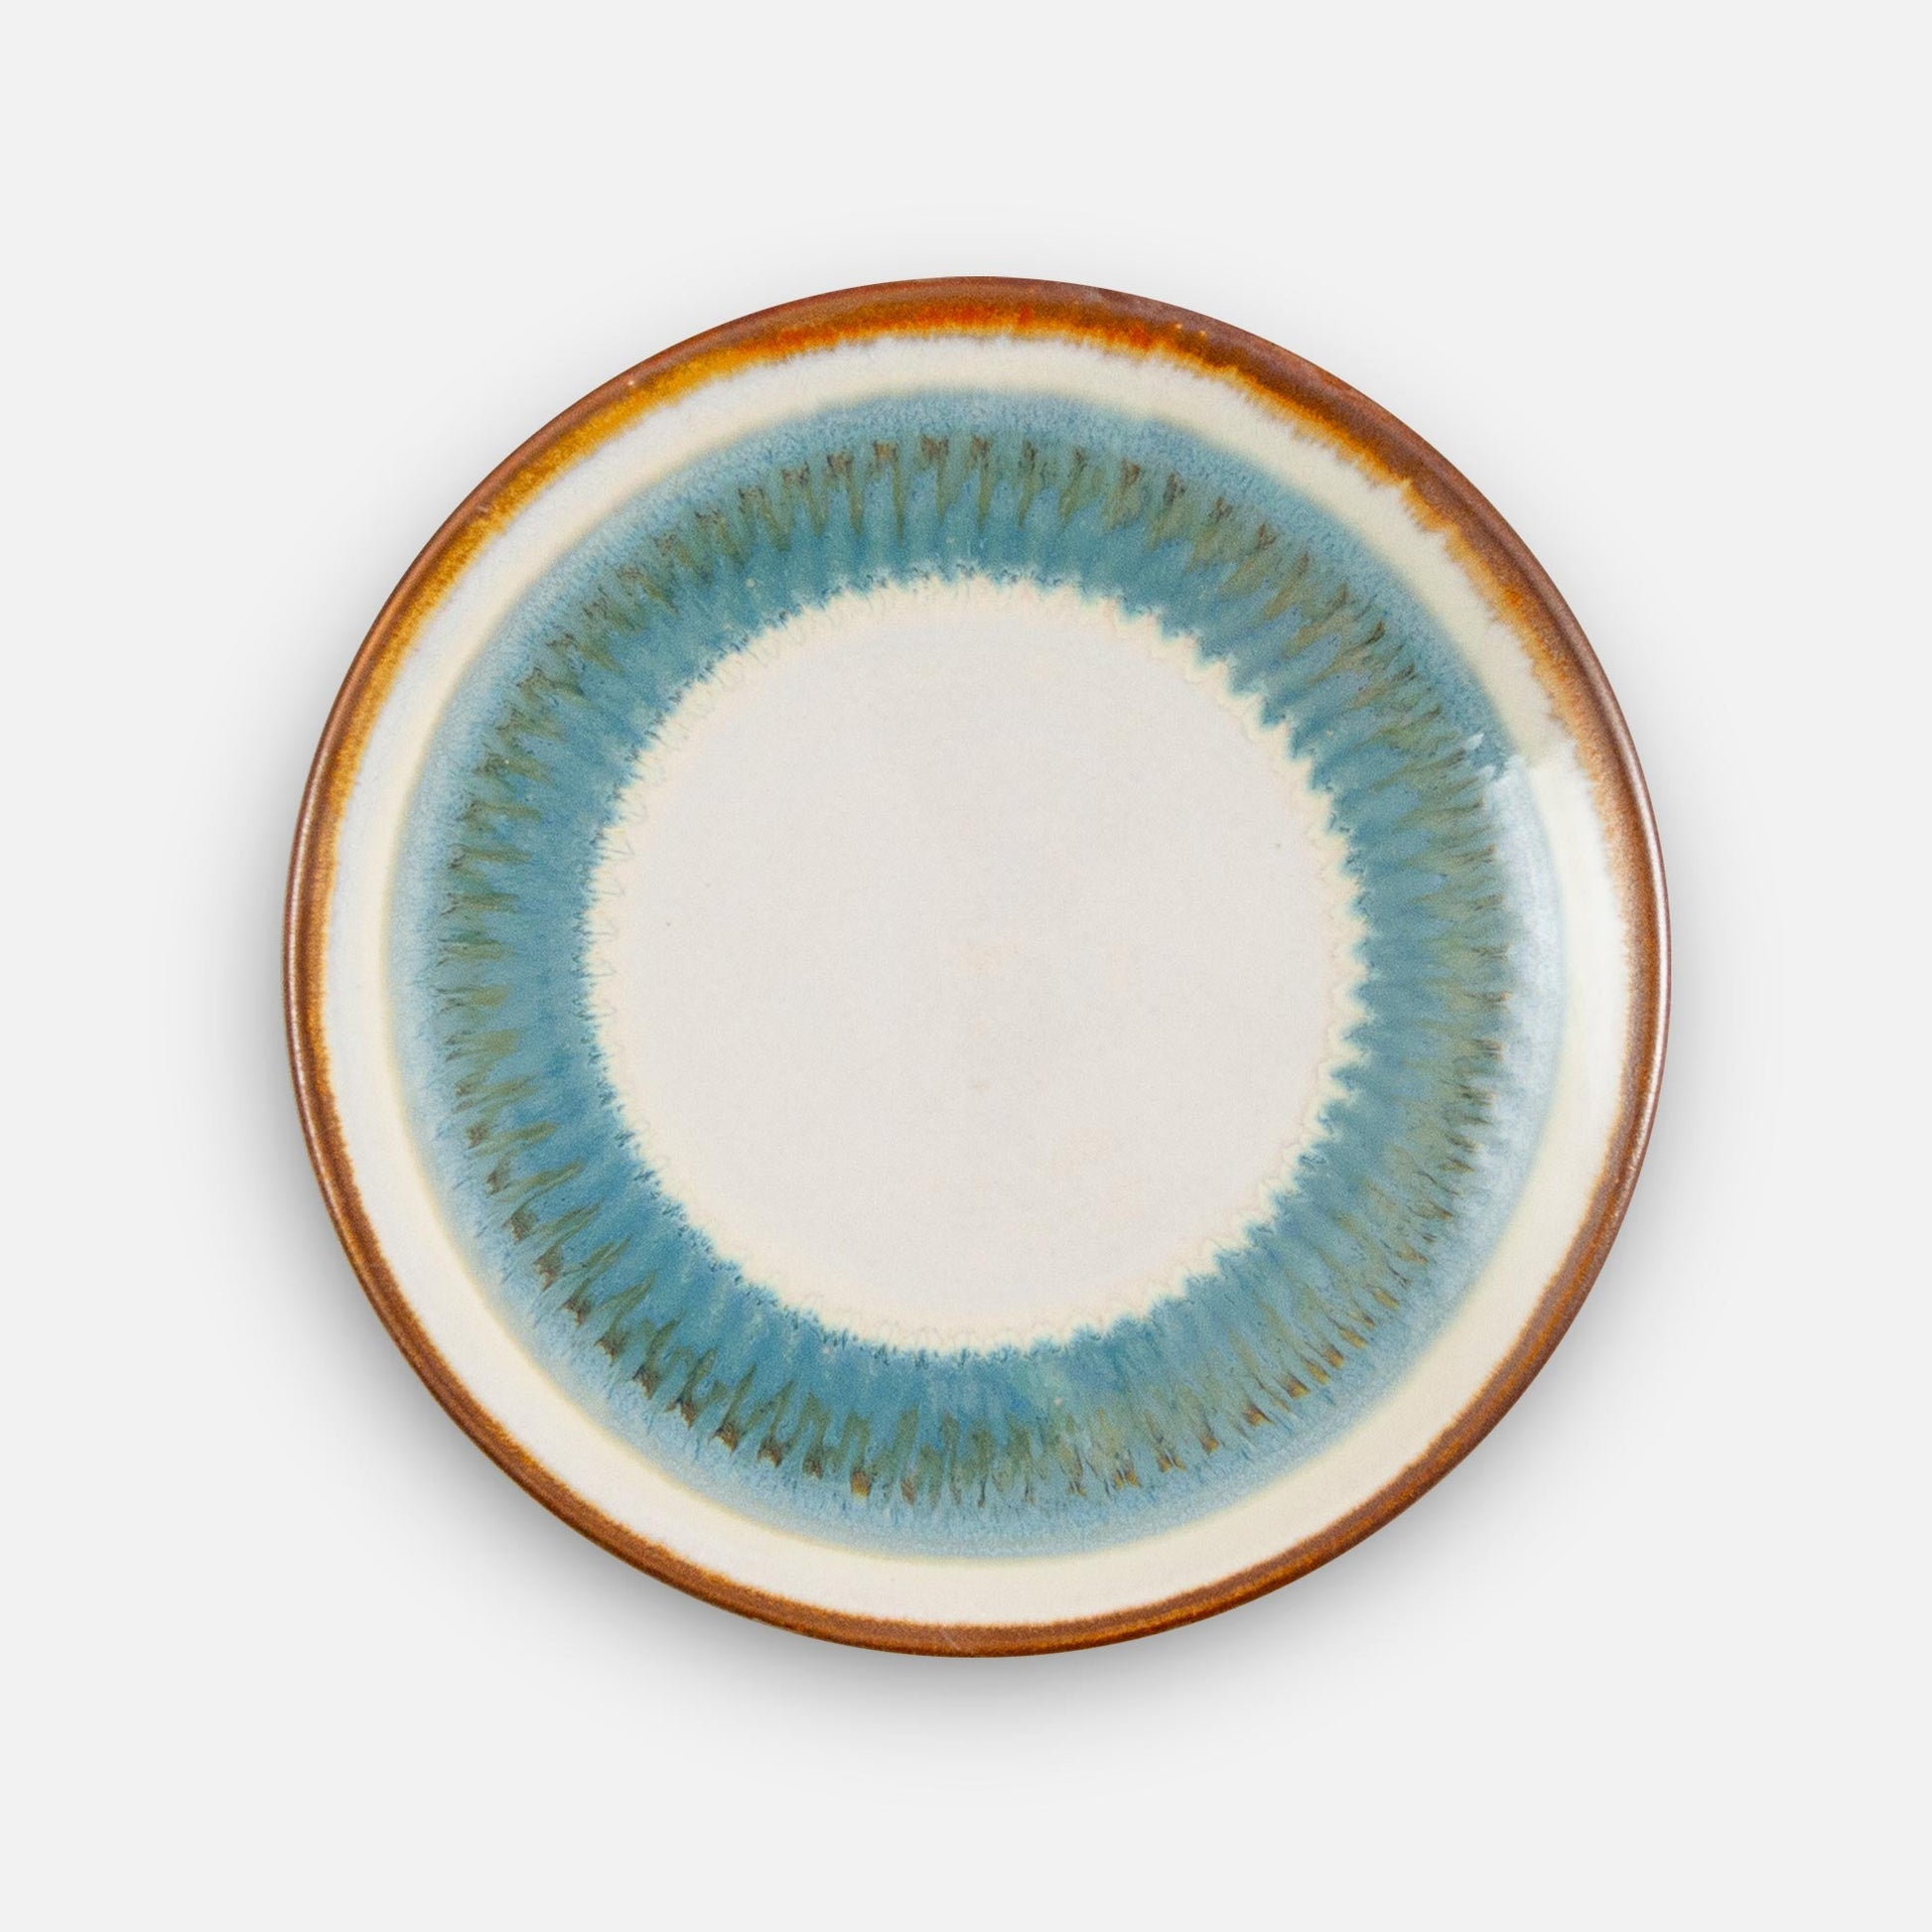 Handmade Pottery Rimless Dessert Plate made by Georgetown Pottery in Maine in Ivory Blue Oribe pattern